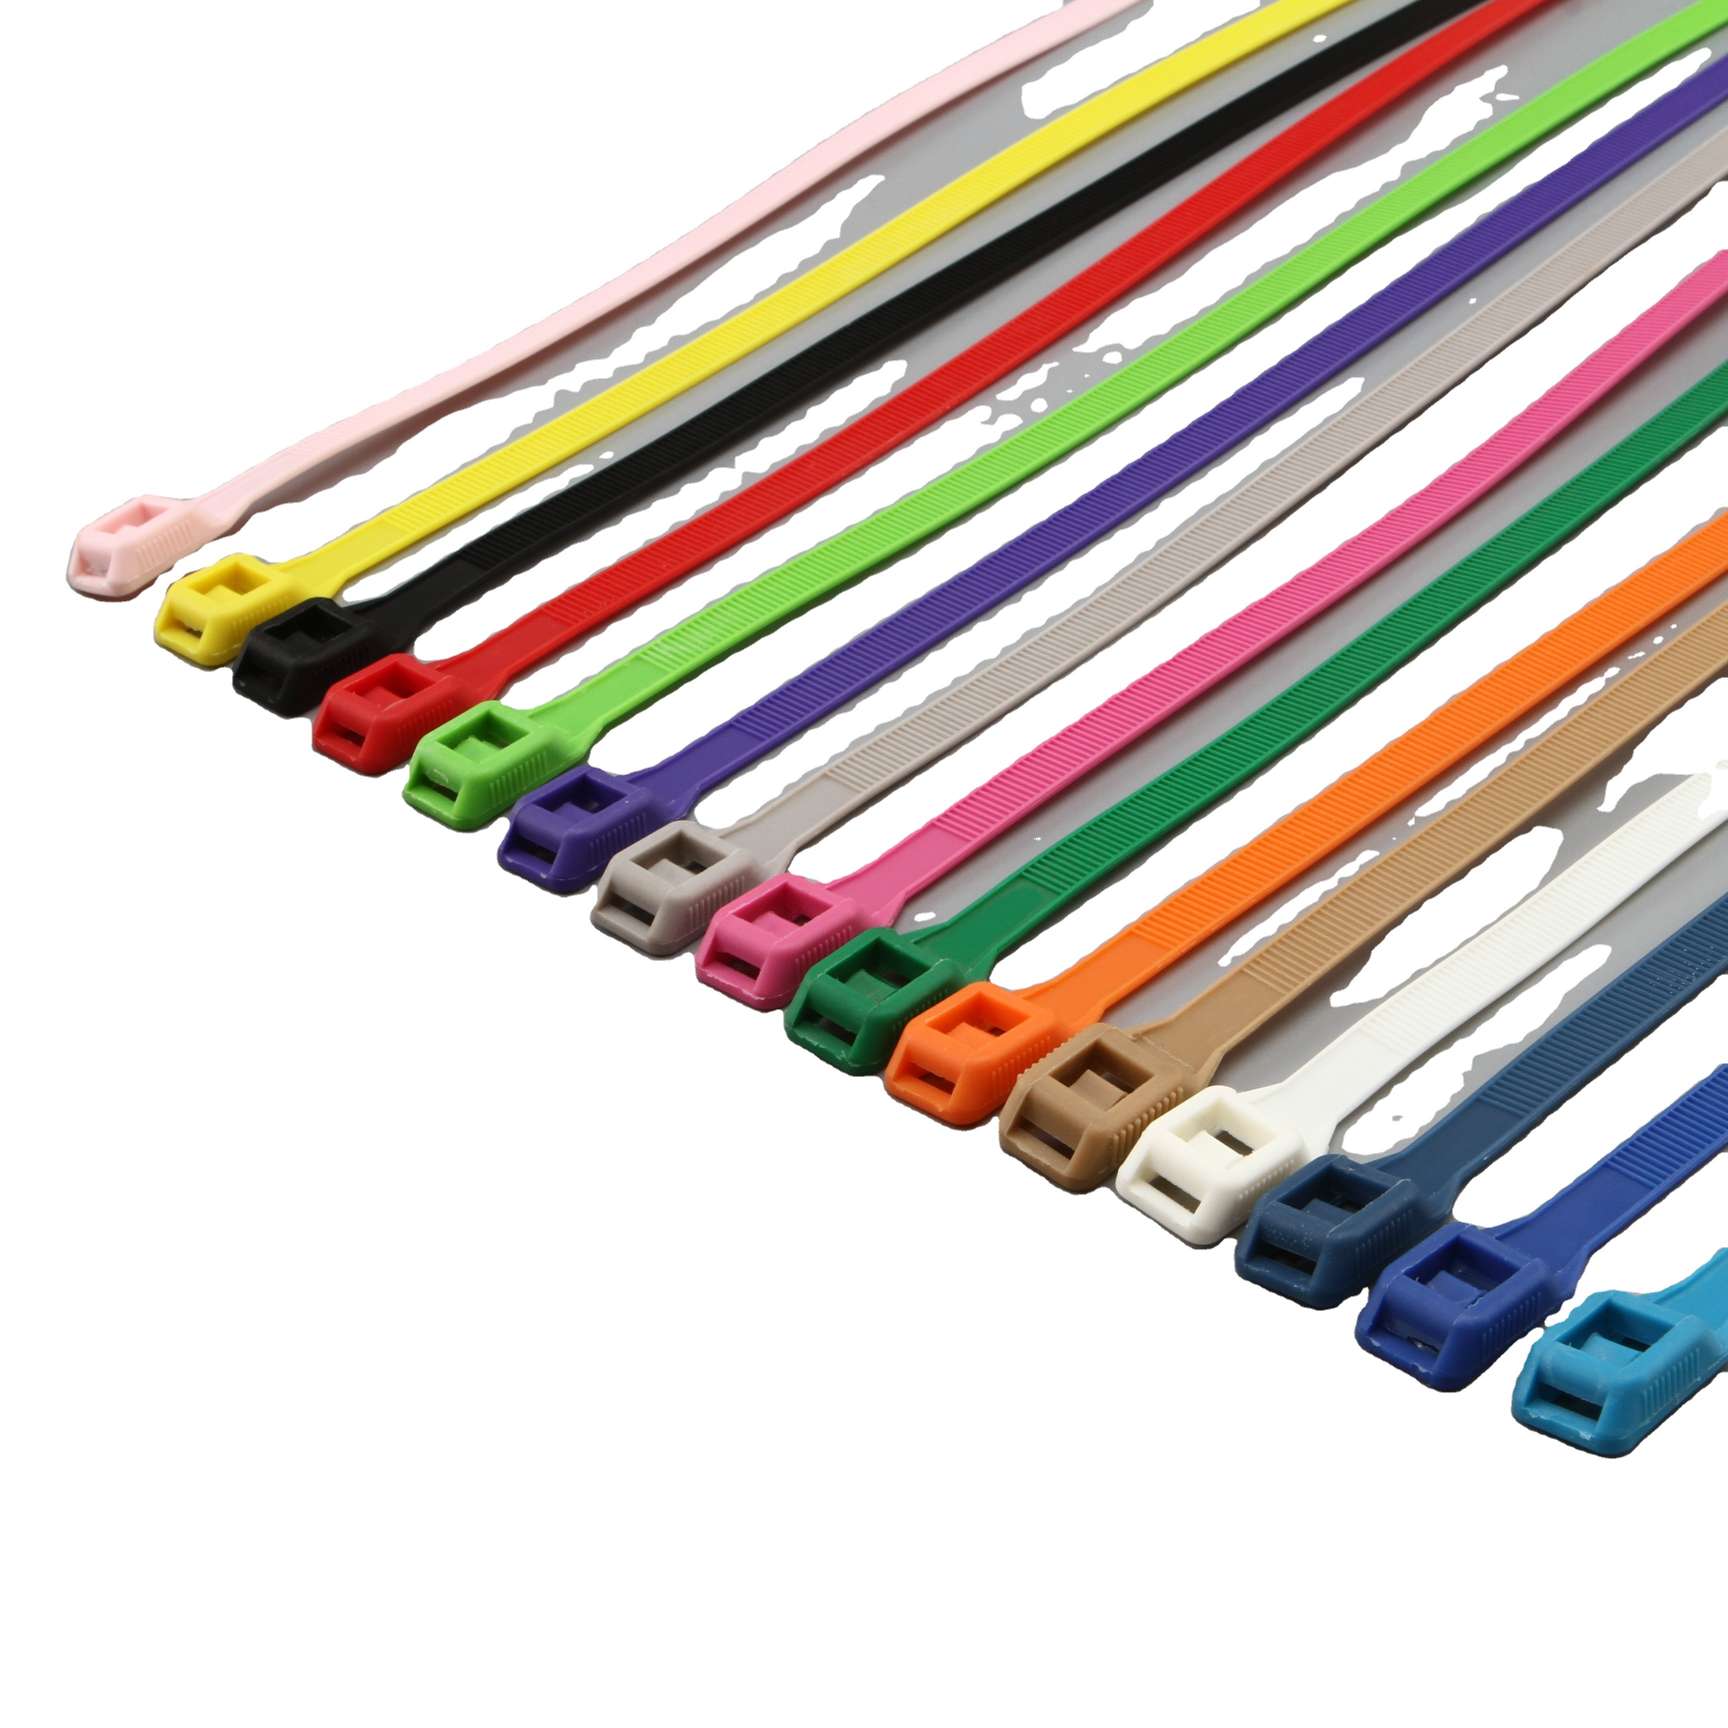 Fishbone cable ties